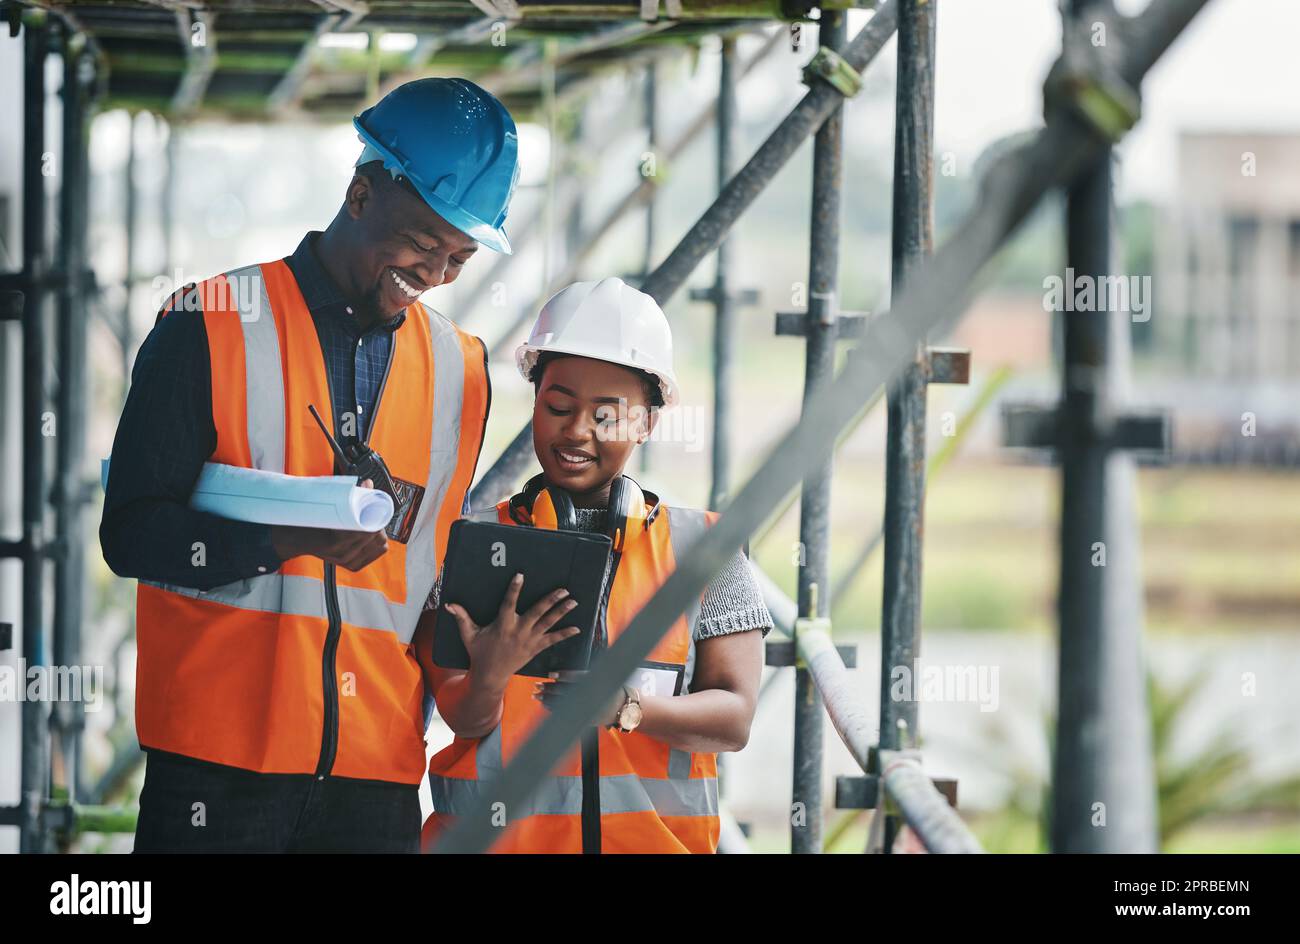 Collecting, storing and tracking all building compliance documentation. a young man and woman using a digital tablet while working at a construction site. Stock Photo